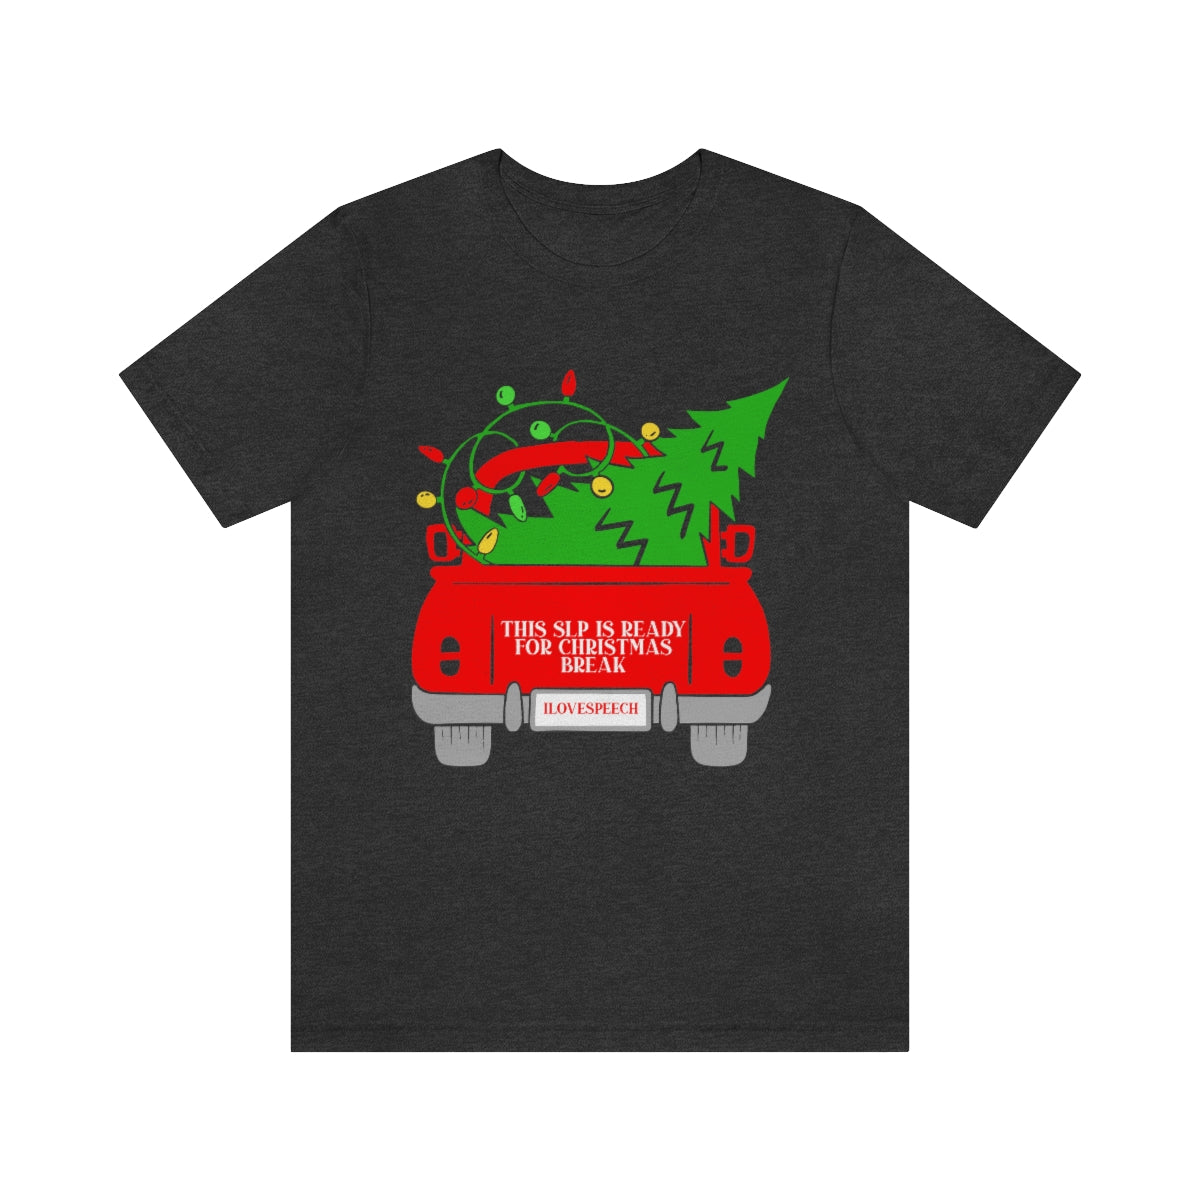 This SLP is Ready for Christmas Break Tee